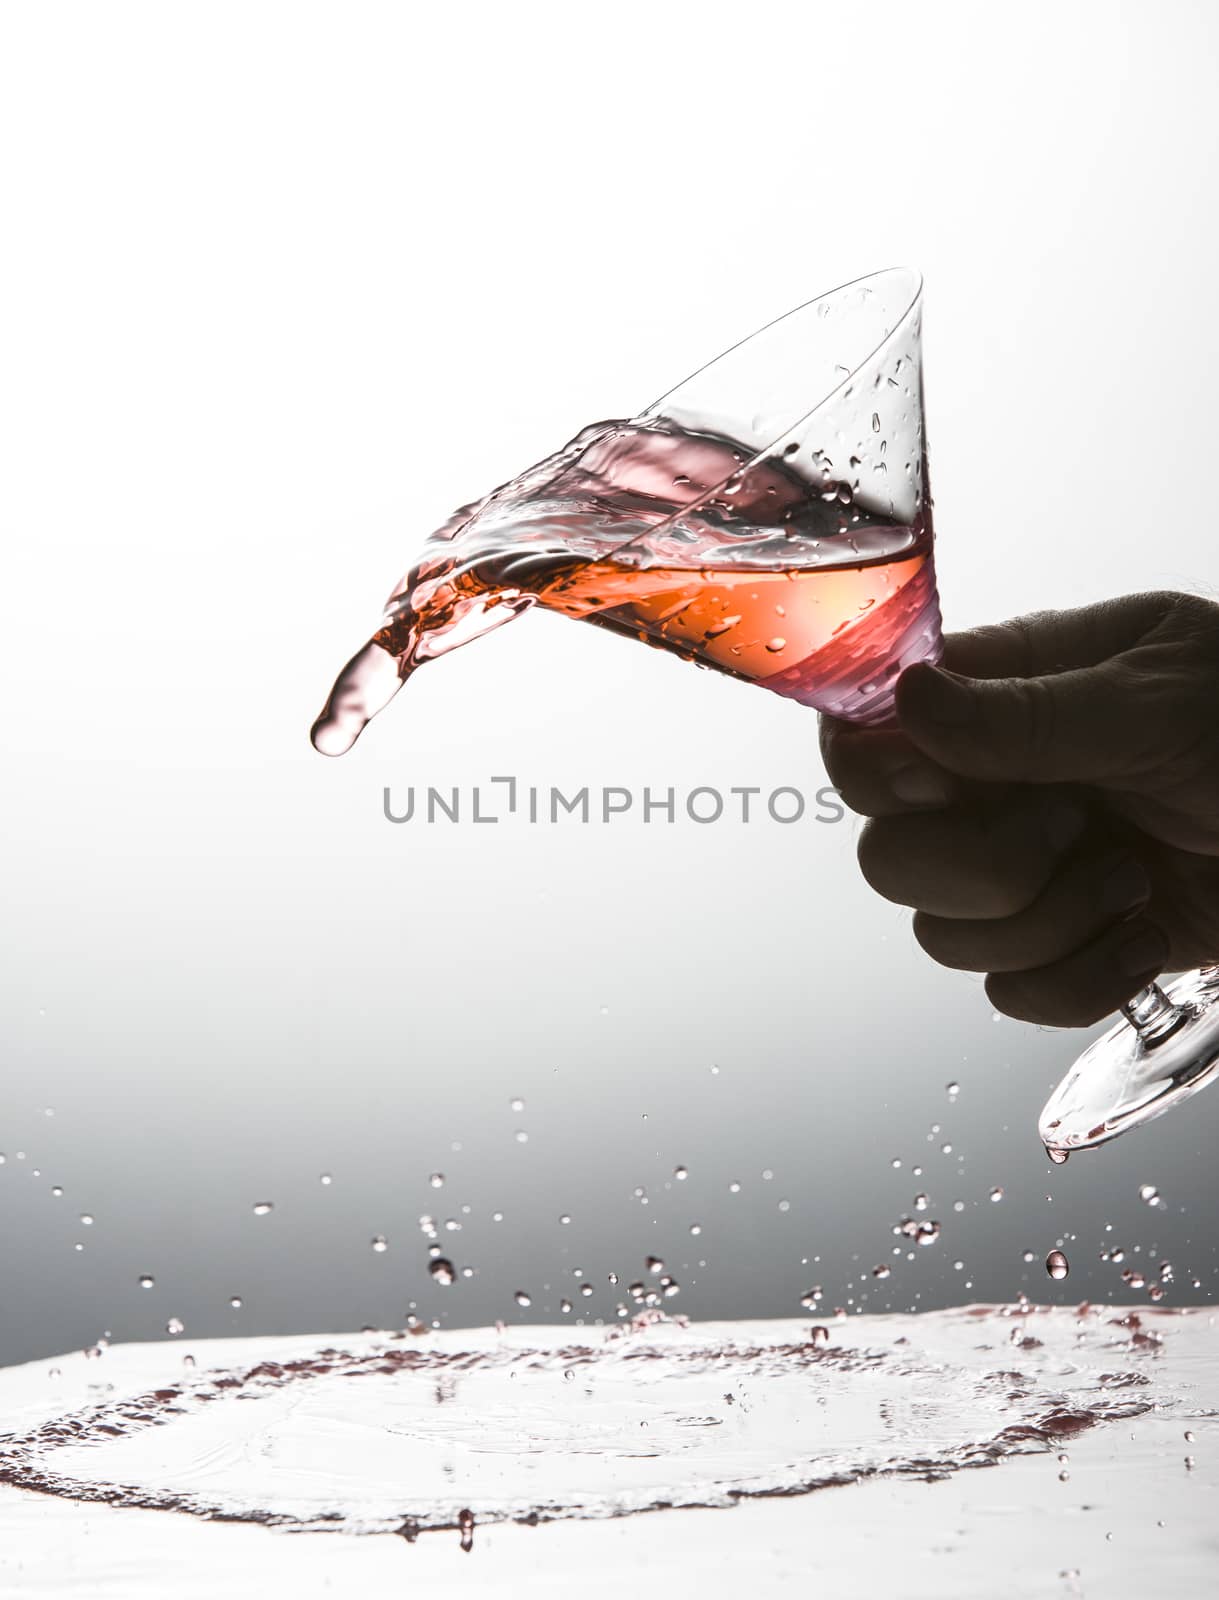 Cocktail being spilled out of a martini glass by Njean